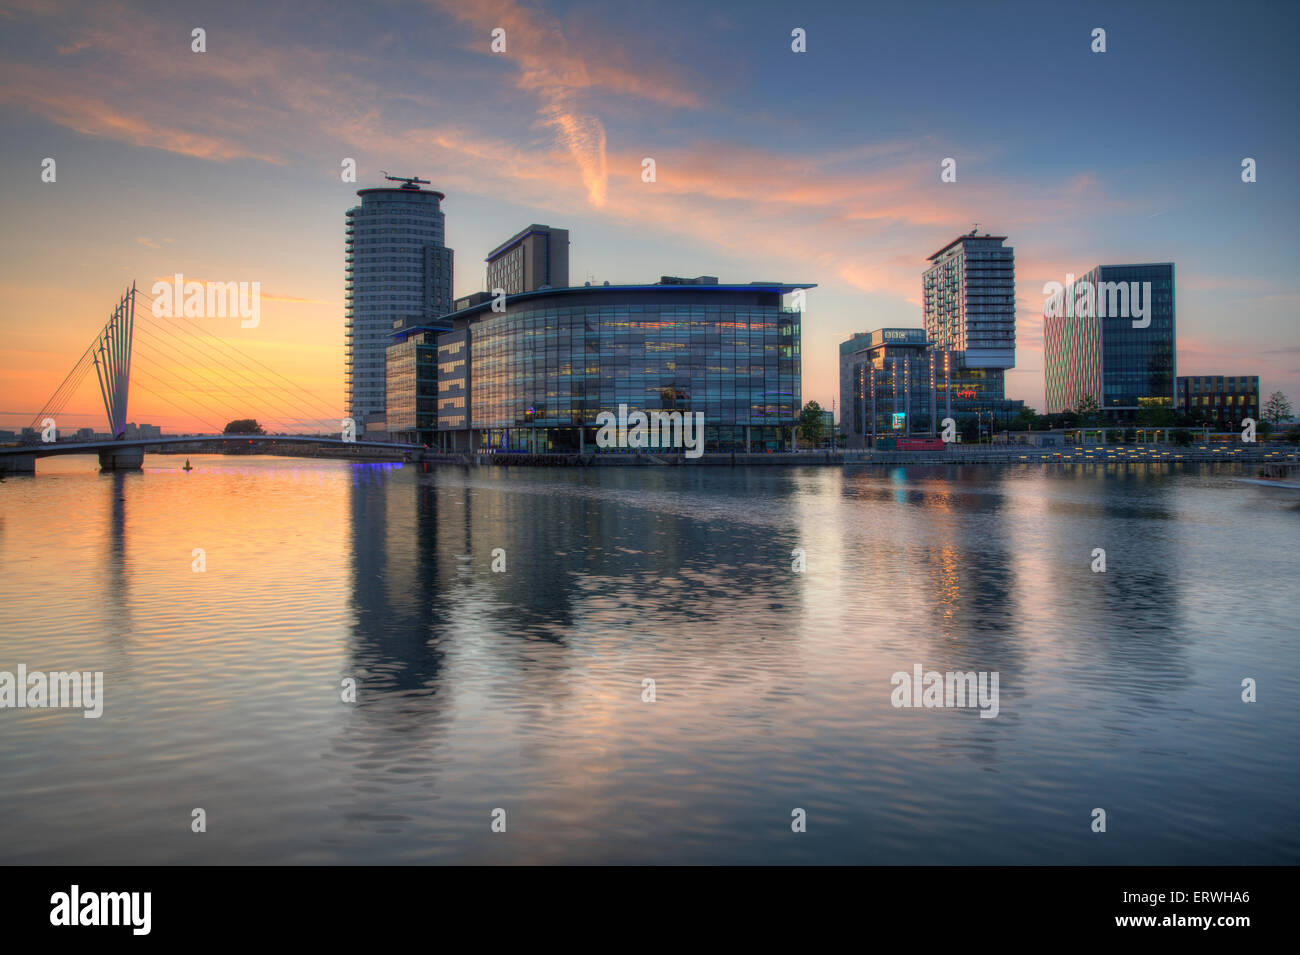 Media City at Salford Quays, Manchester Stock Photo